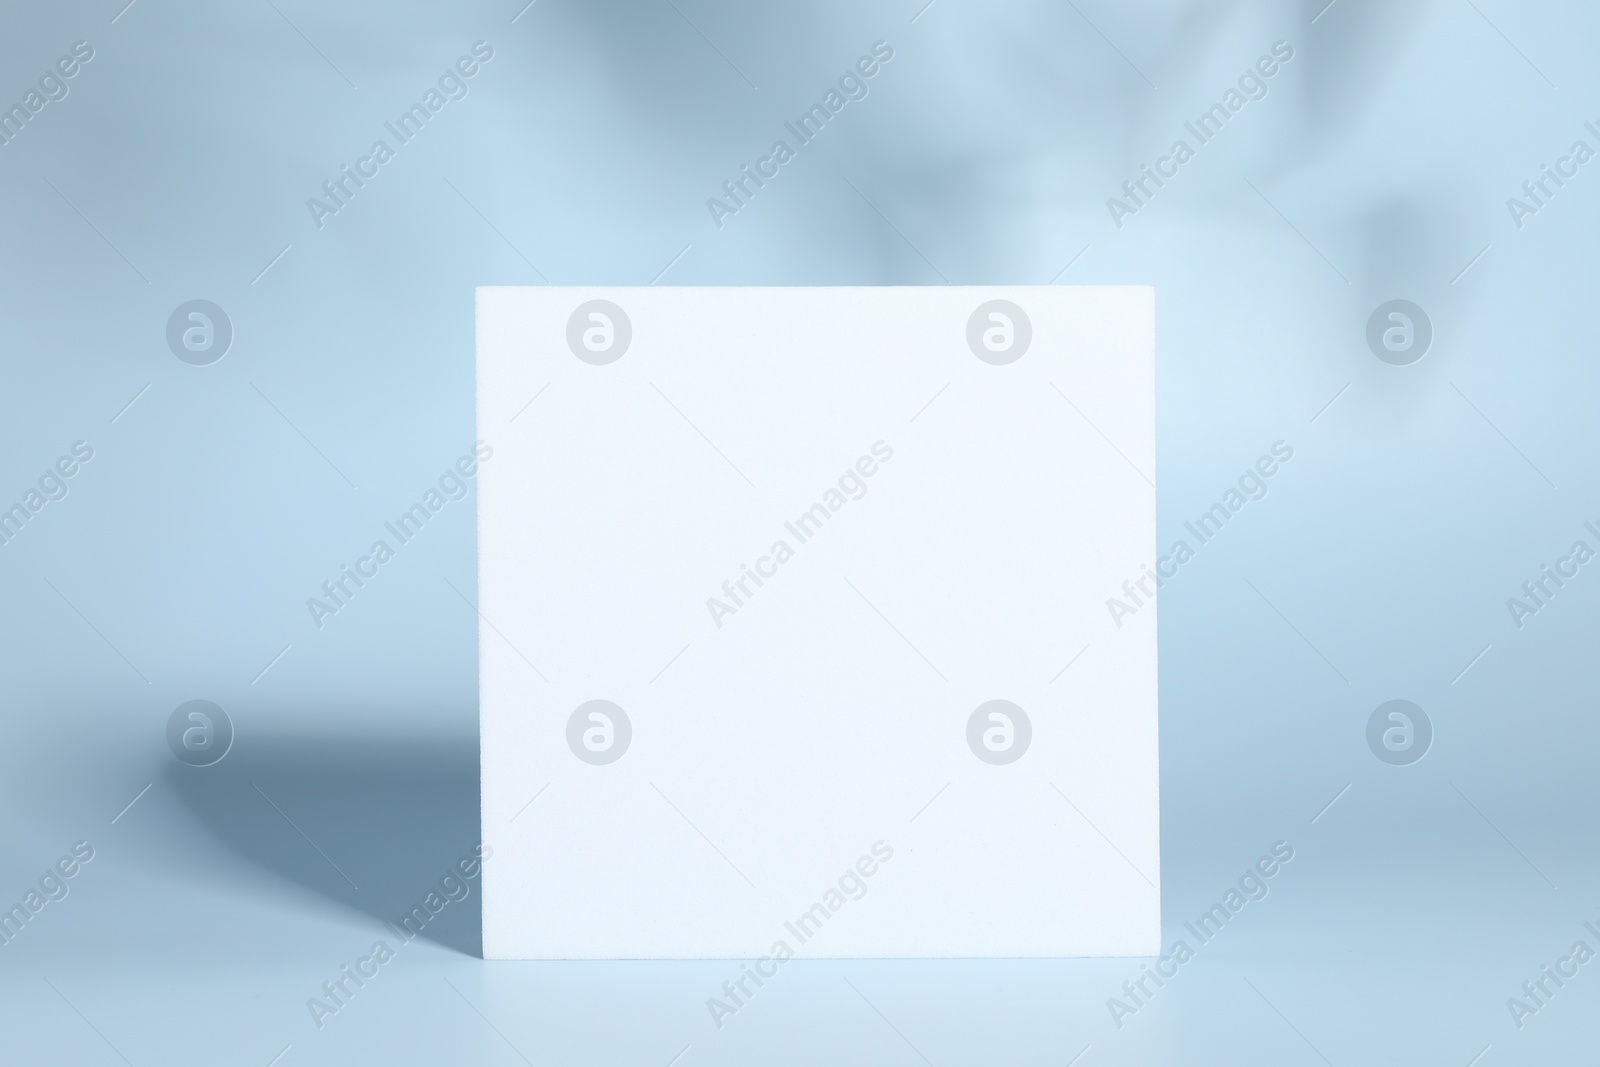 Photo of Presentation of product. White podium and shadows on light blue background. Space for text